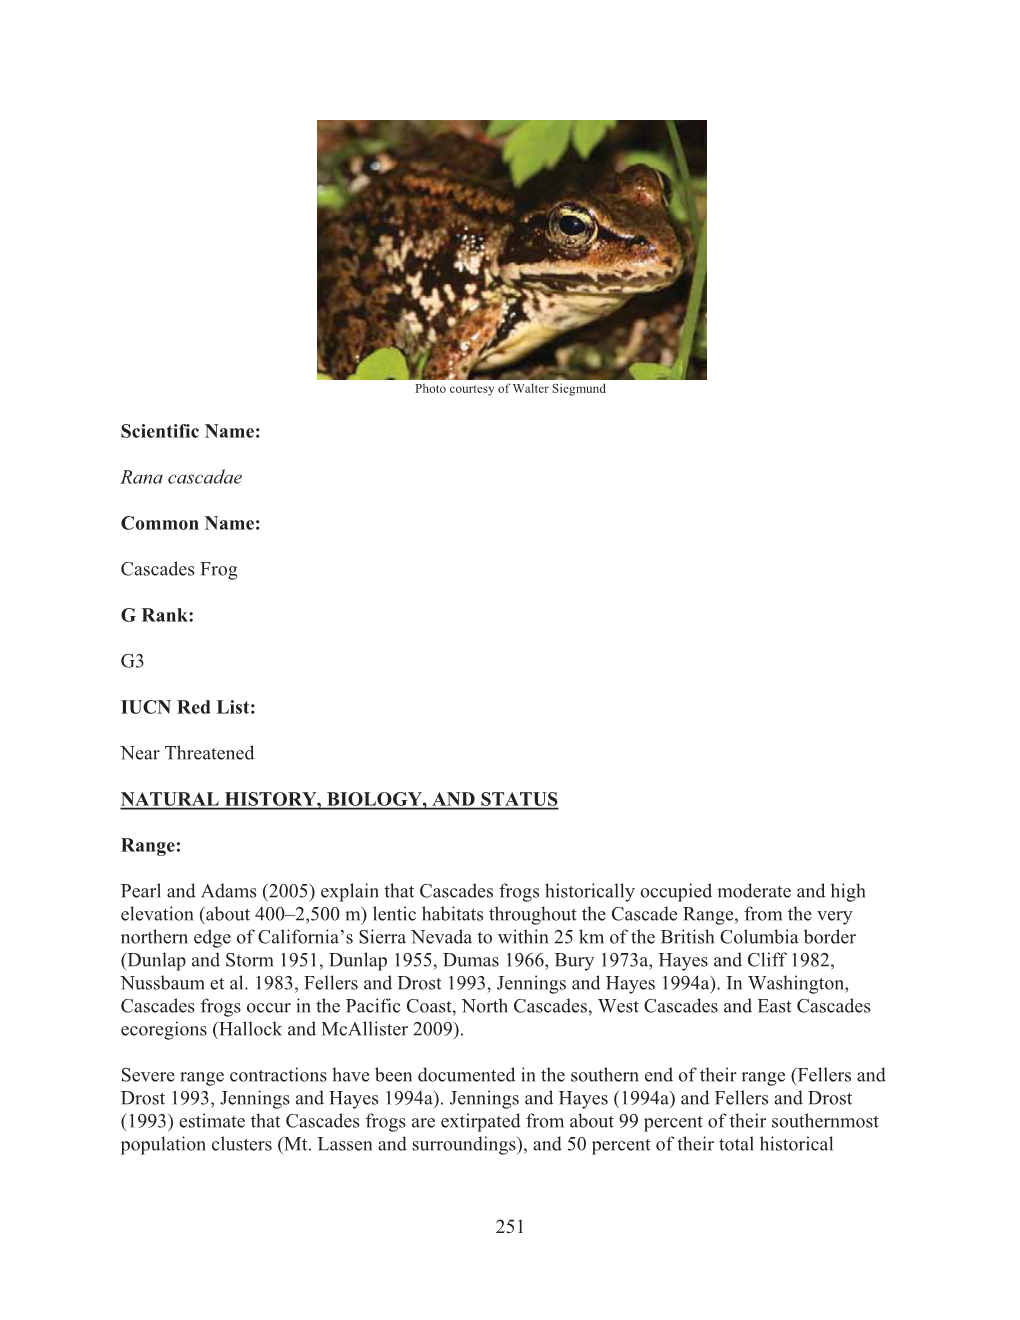 Cascades Frog Endangered Species Act Petition, 2012